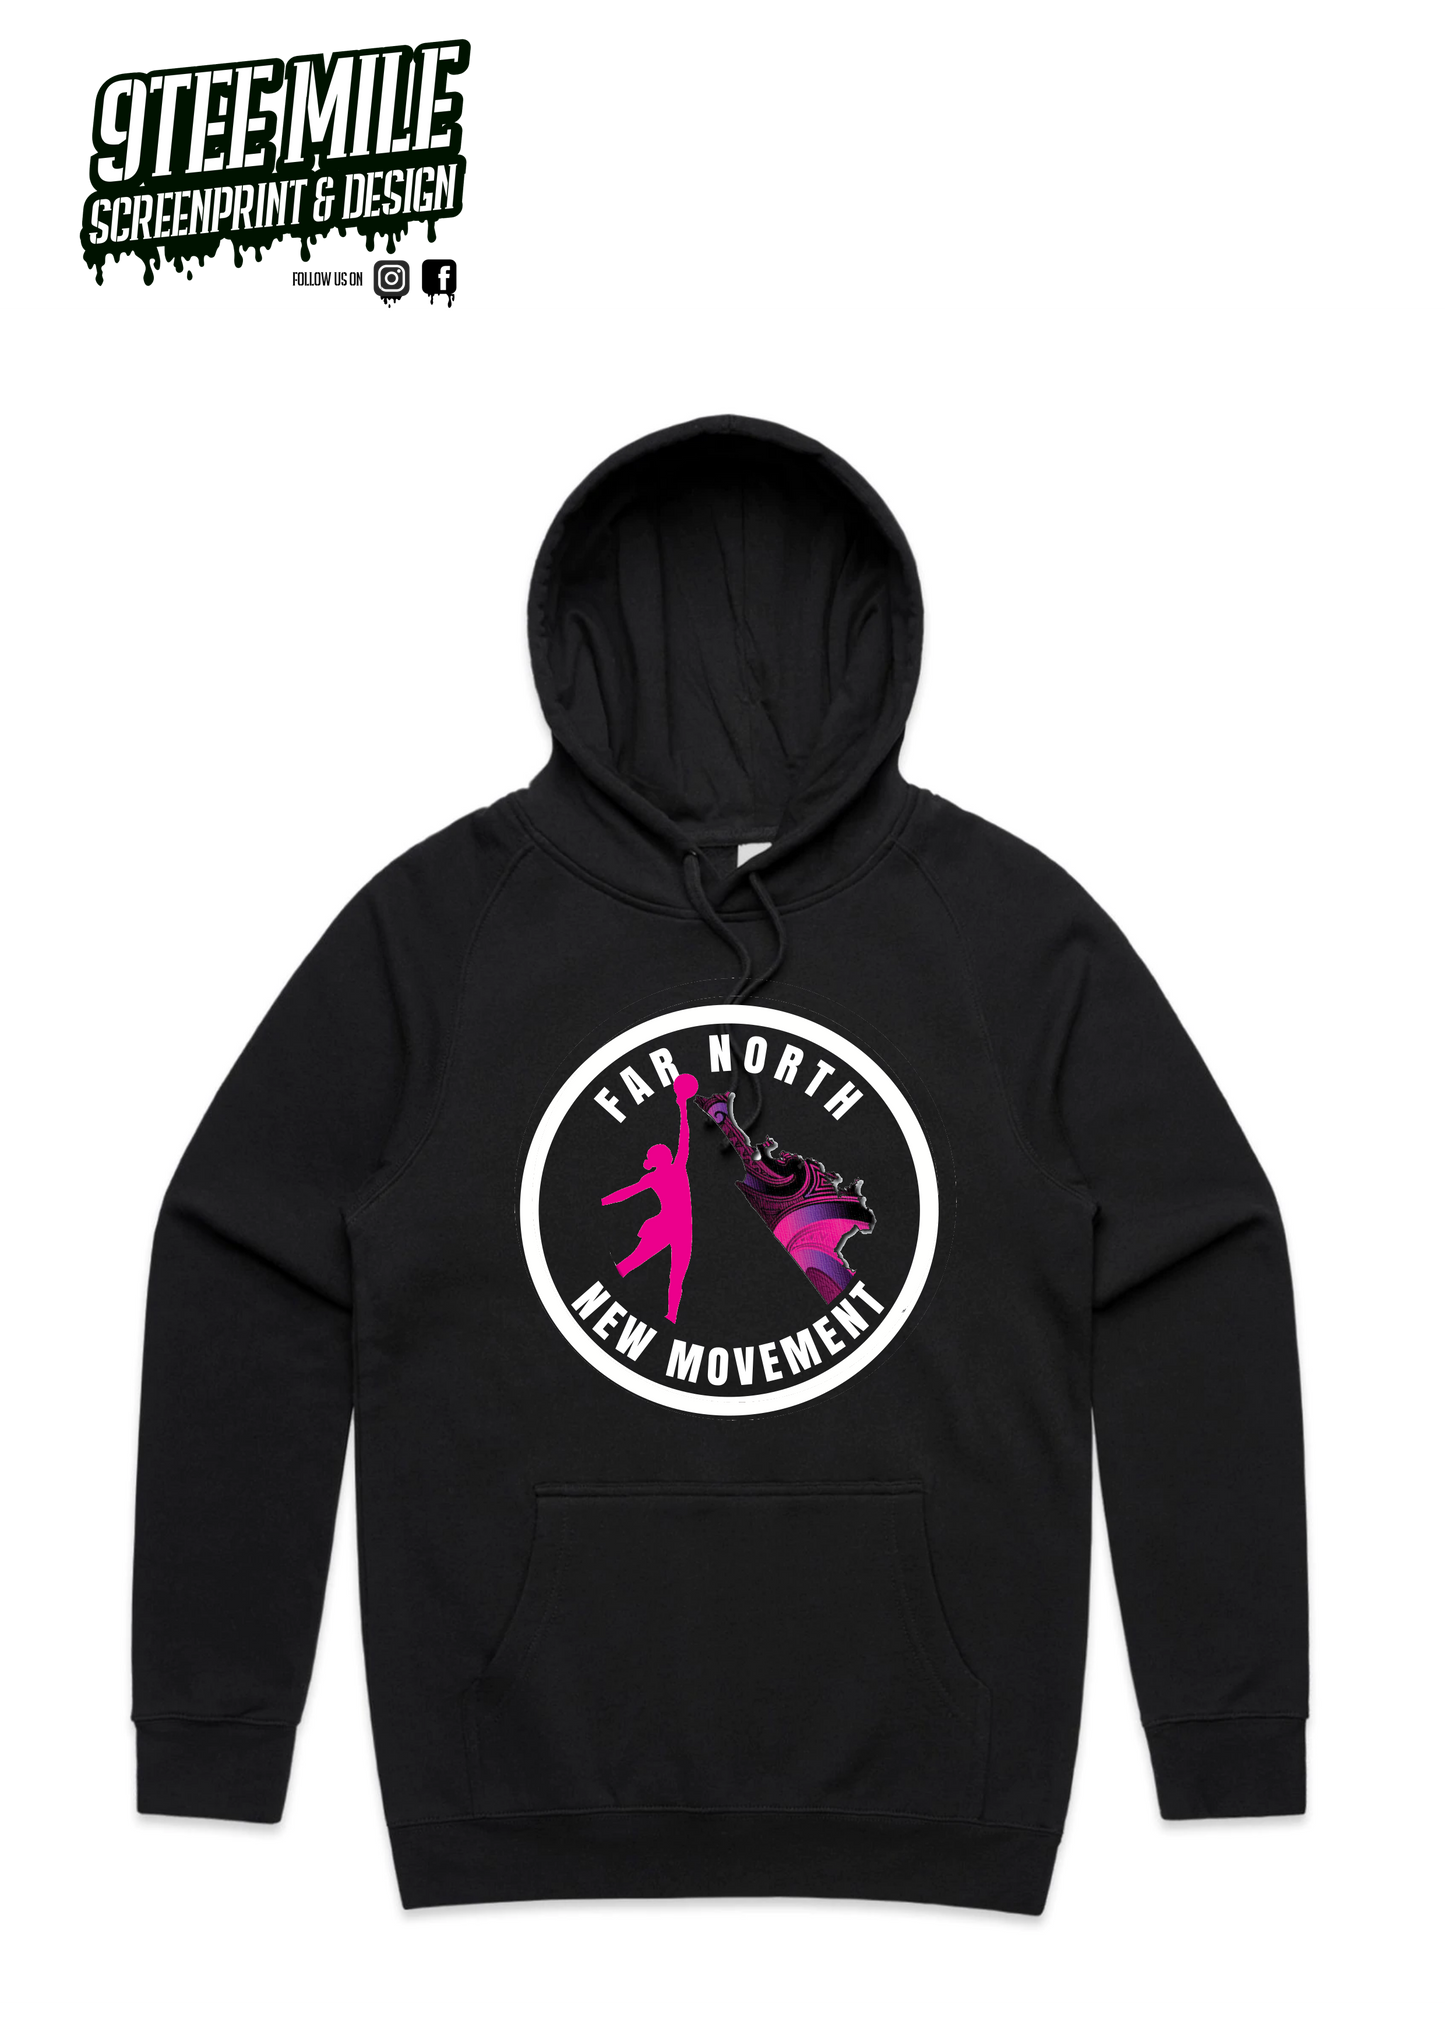 Far North New Movement Hoodies - Youth - NAMED